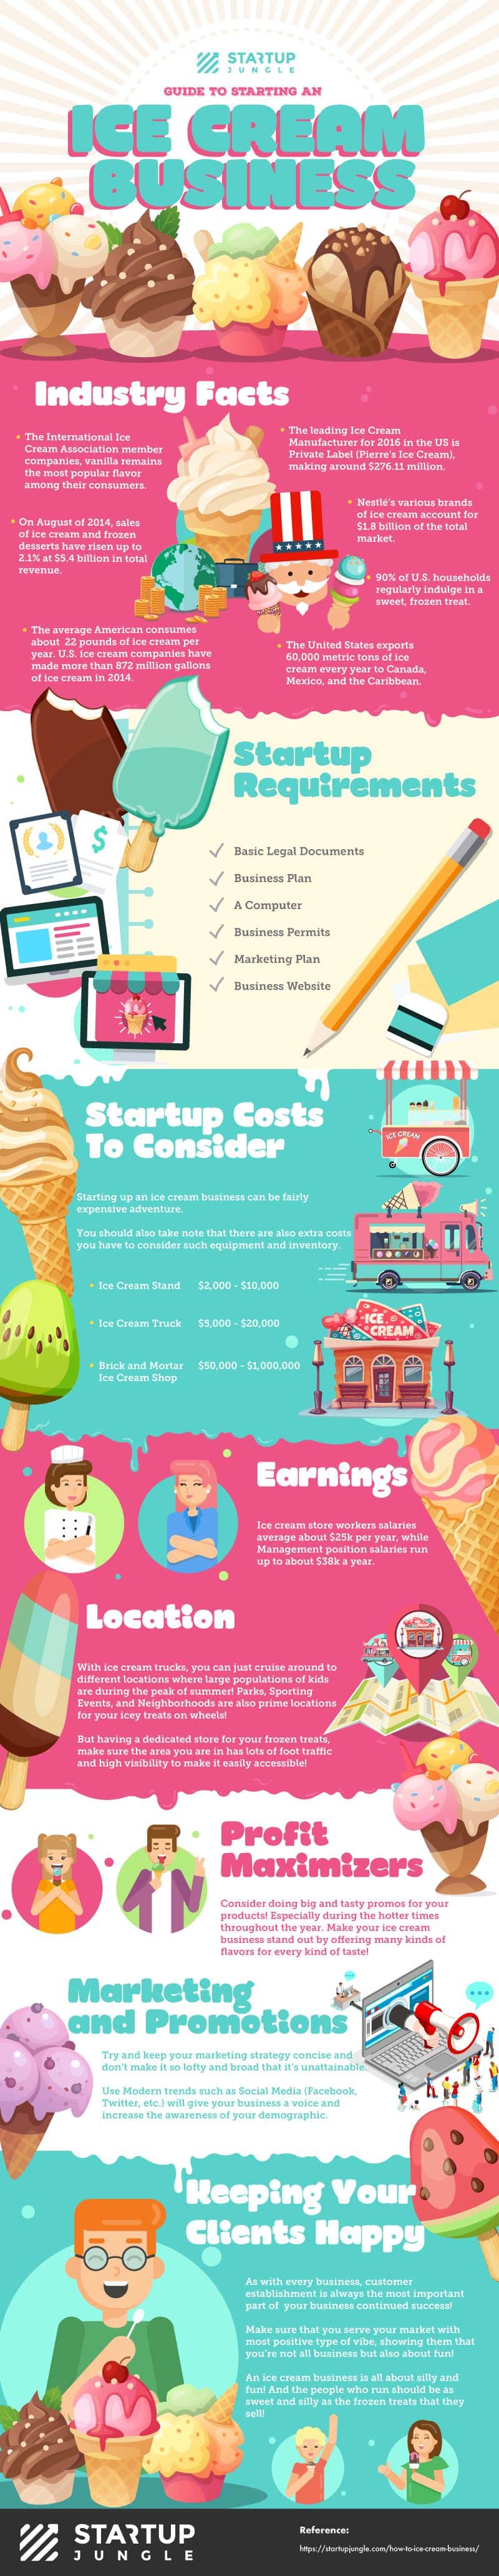 How to Start Your Own Ice Cream Business